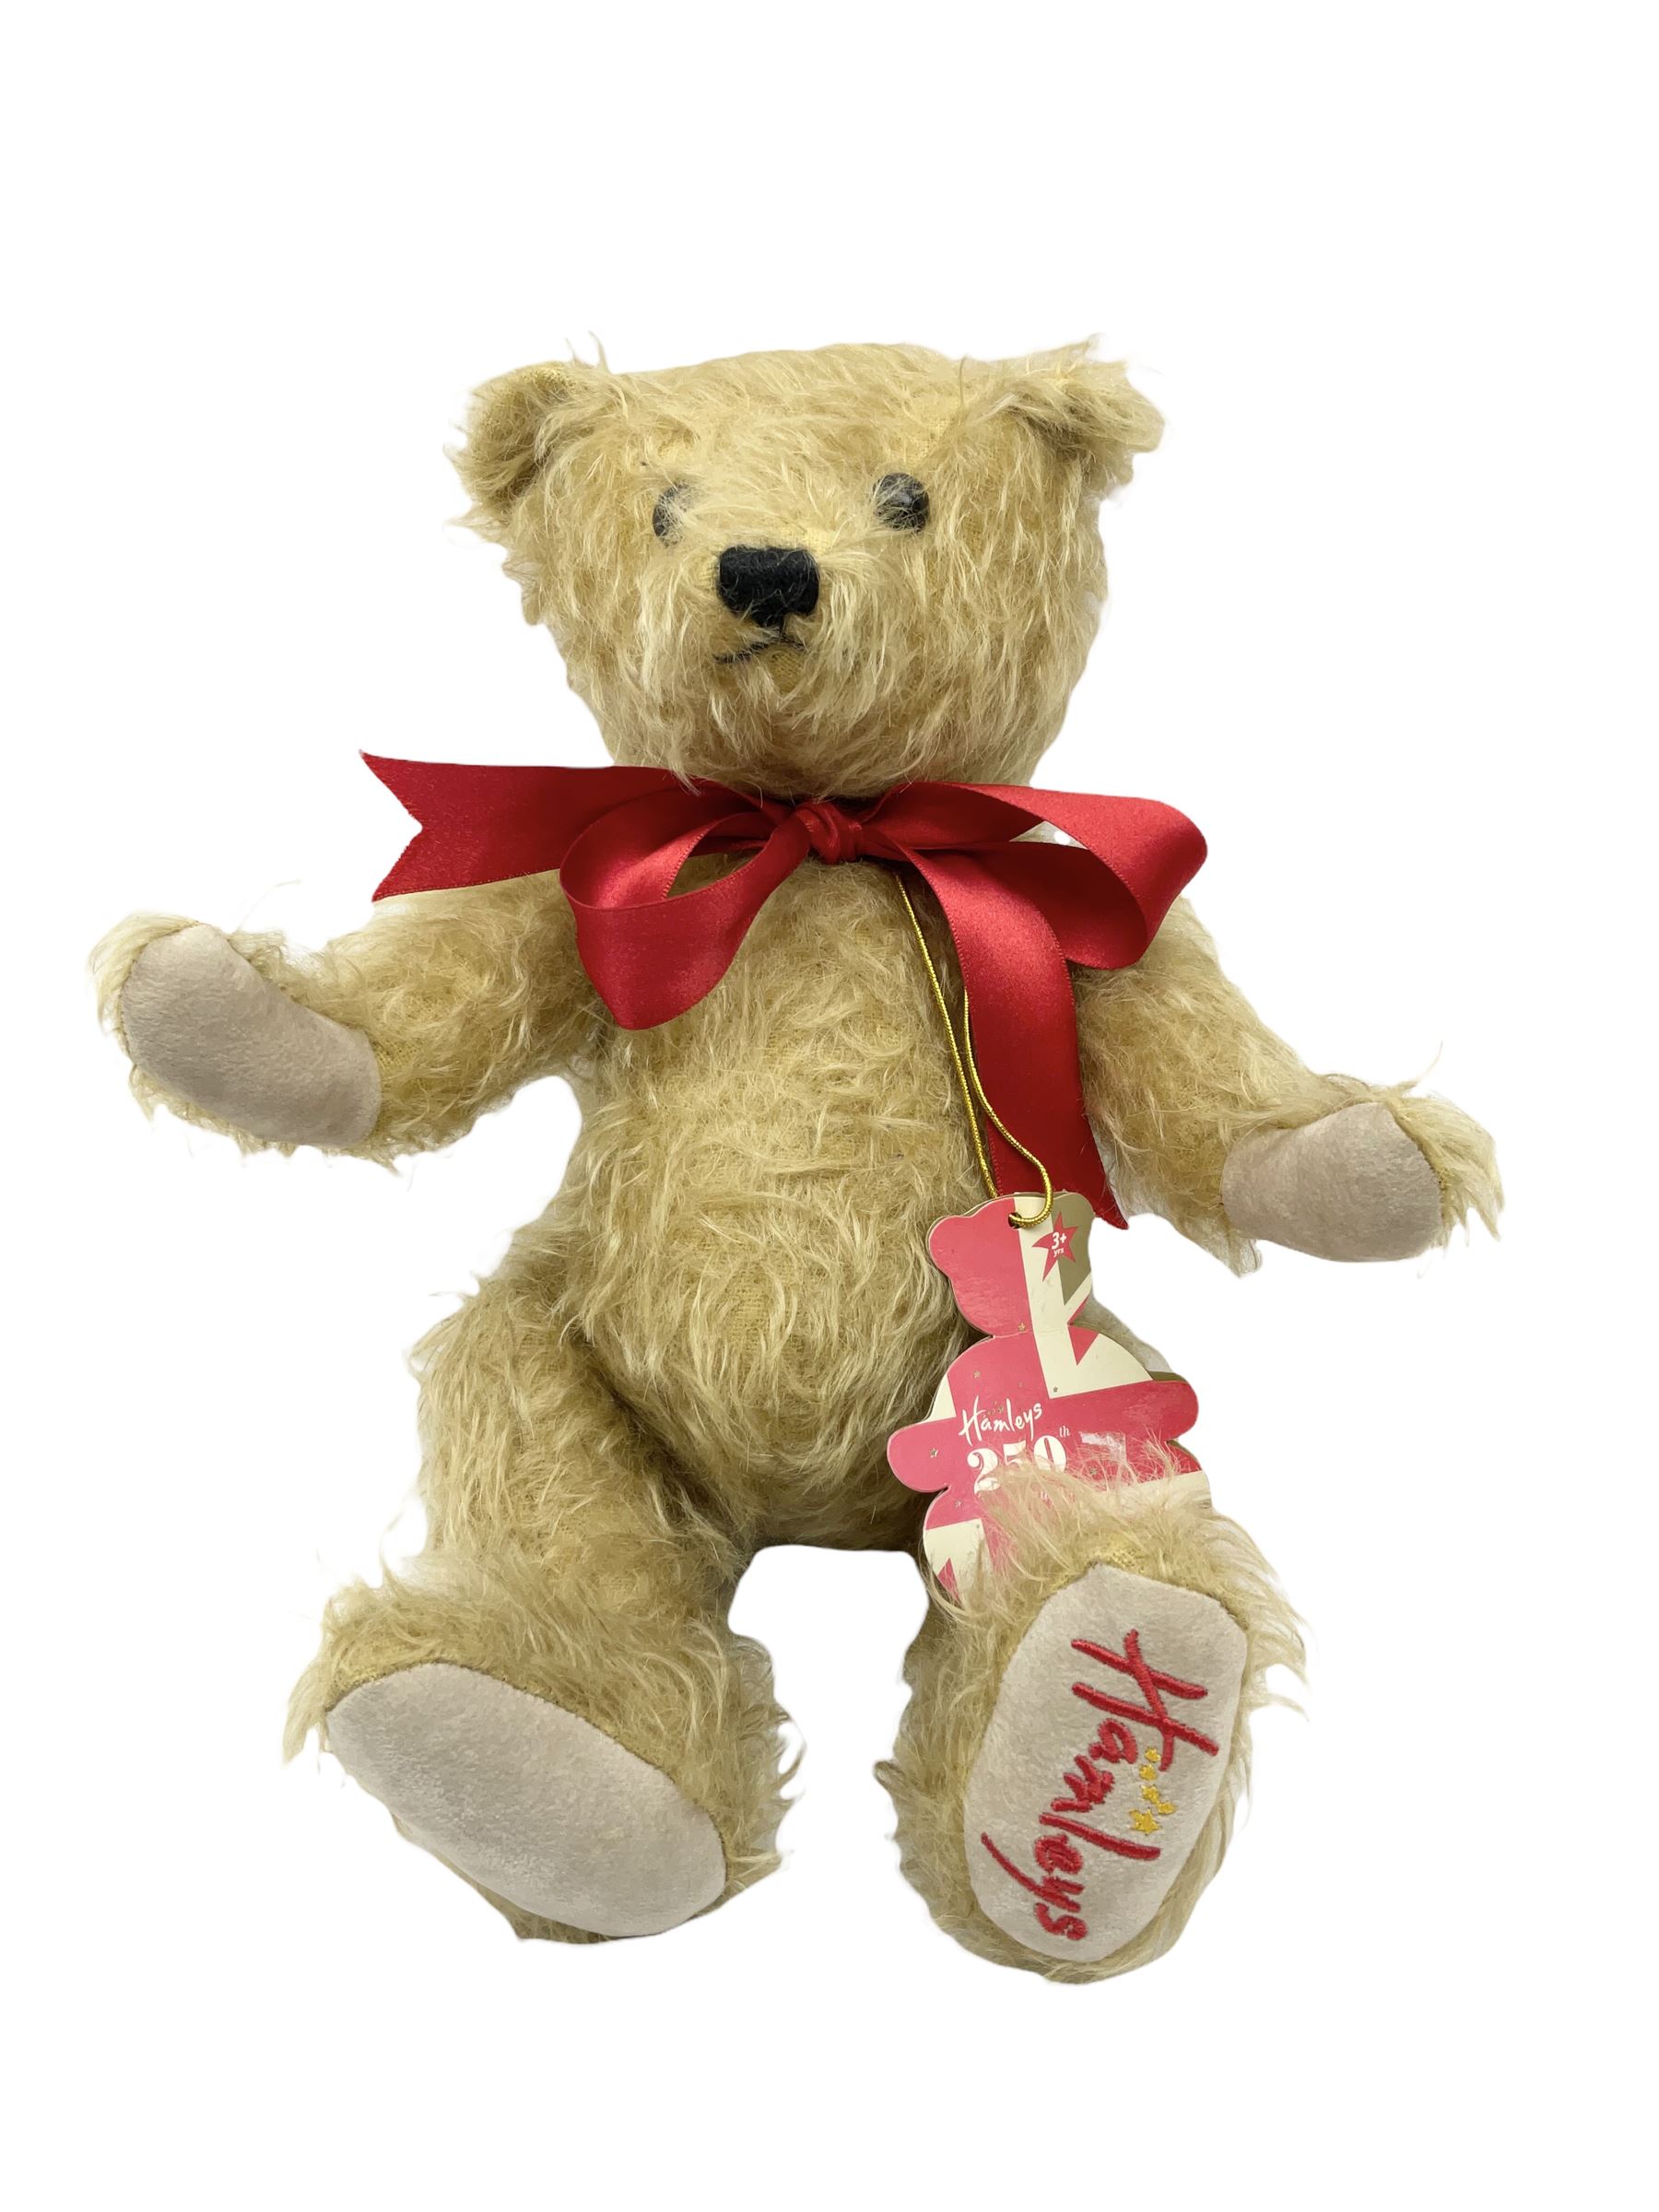 Five modern collector's teddy bears - Steiff 2001 bear No.660177 with tags; Hermann limited edition - Image 2 of 8